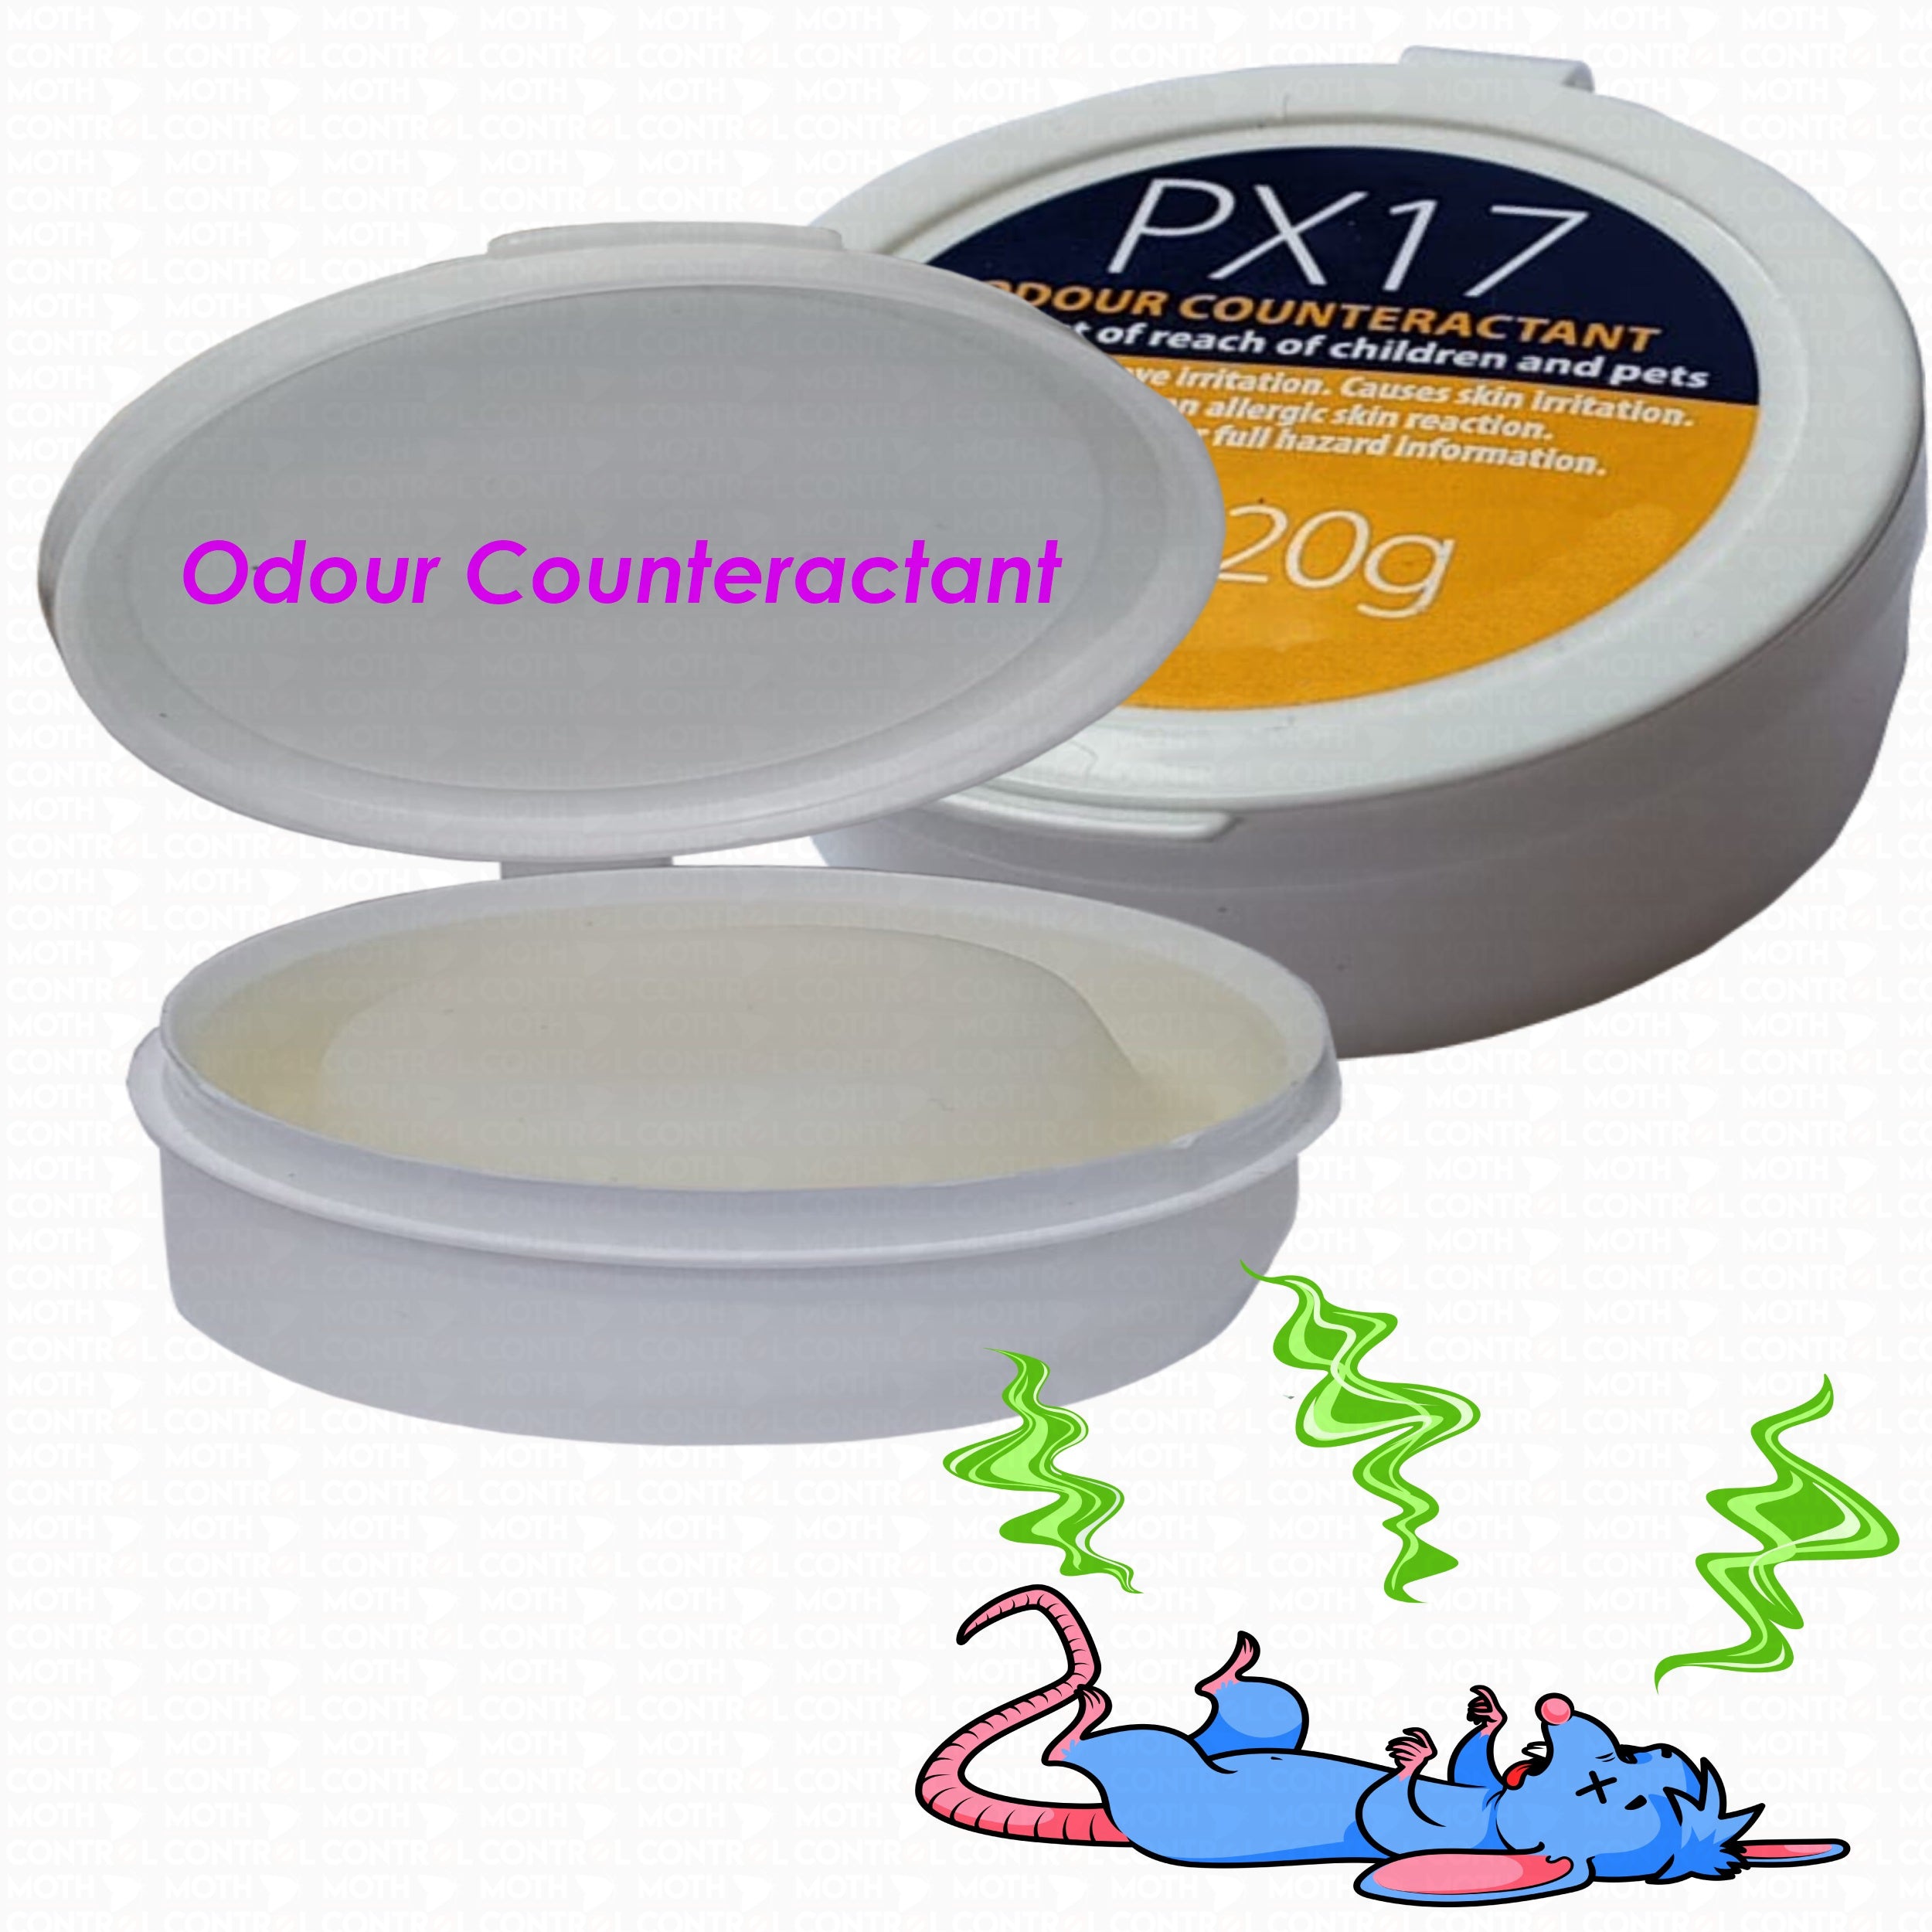 PX17- PET SMELL ODOUR REMOVER AIR FRESHENER DOG DEAD RAT RODENT ODOURS - Moth Control